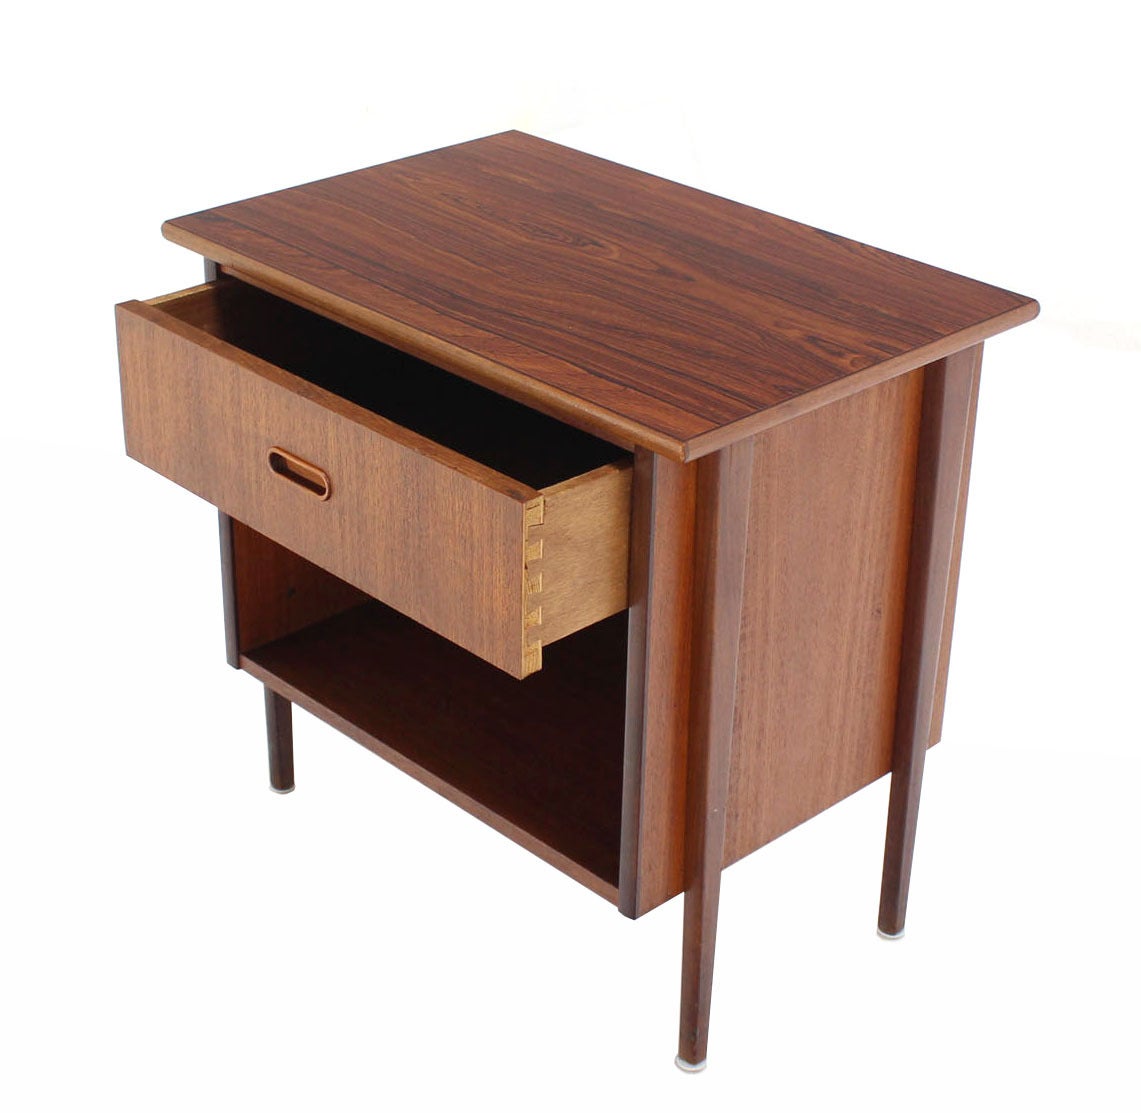 Lacquered Danish Modern Teak End Table or Night Stand